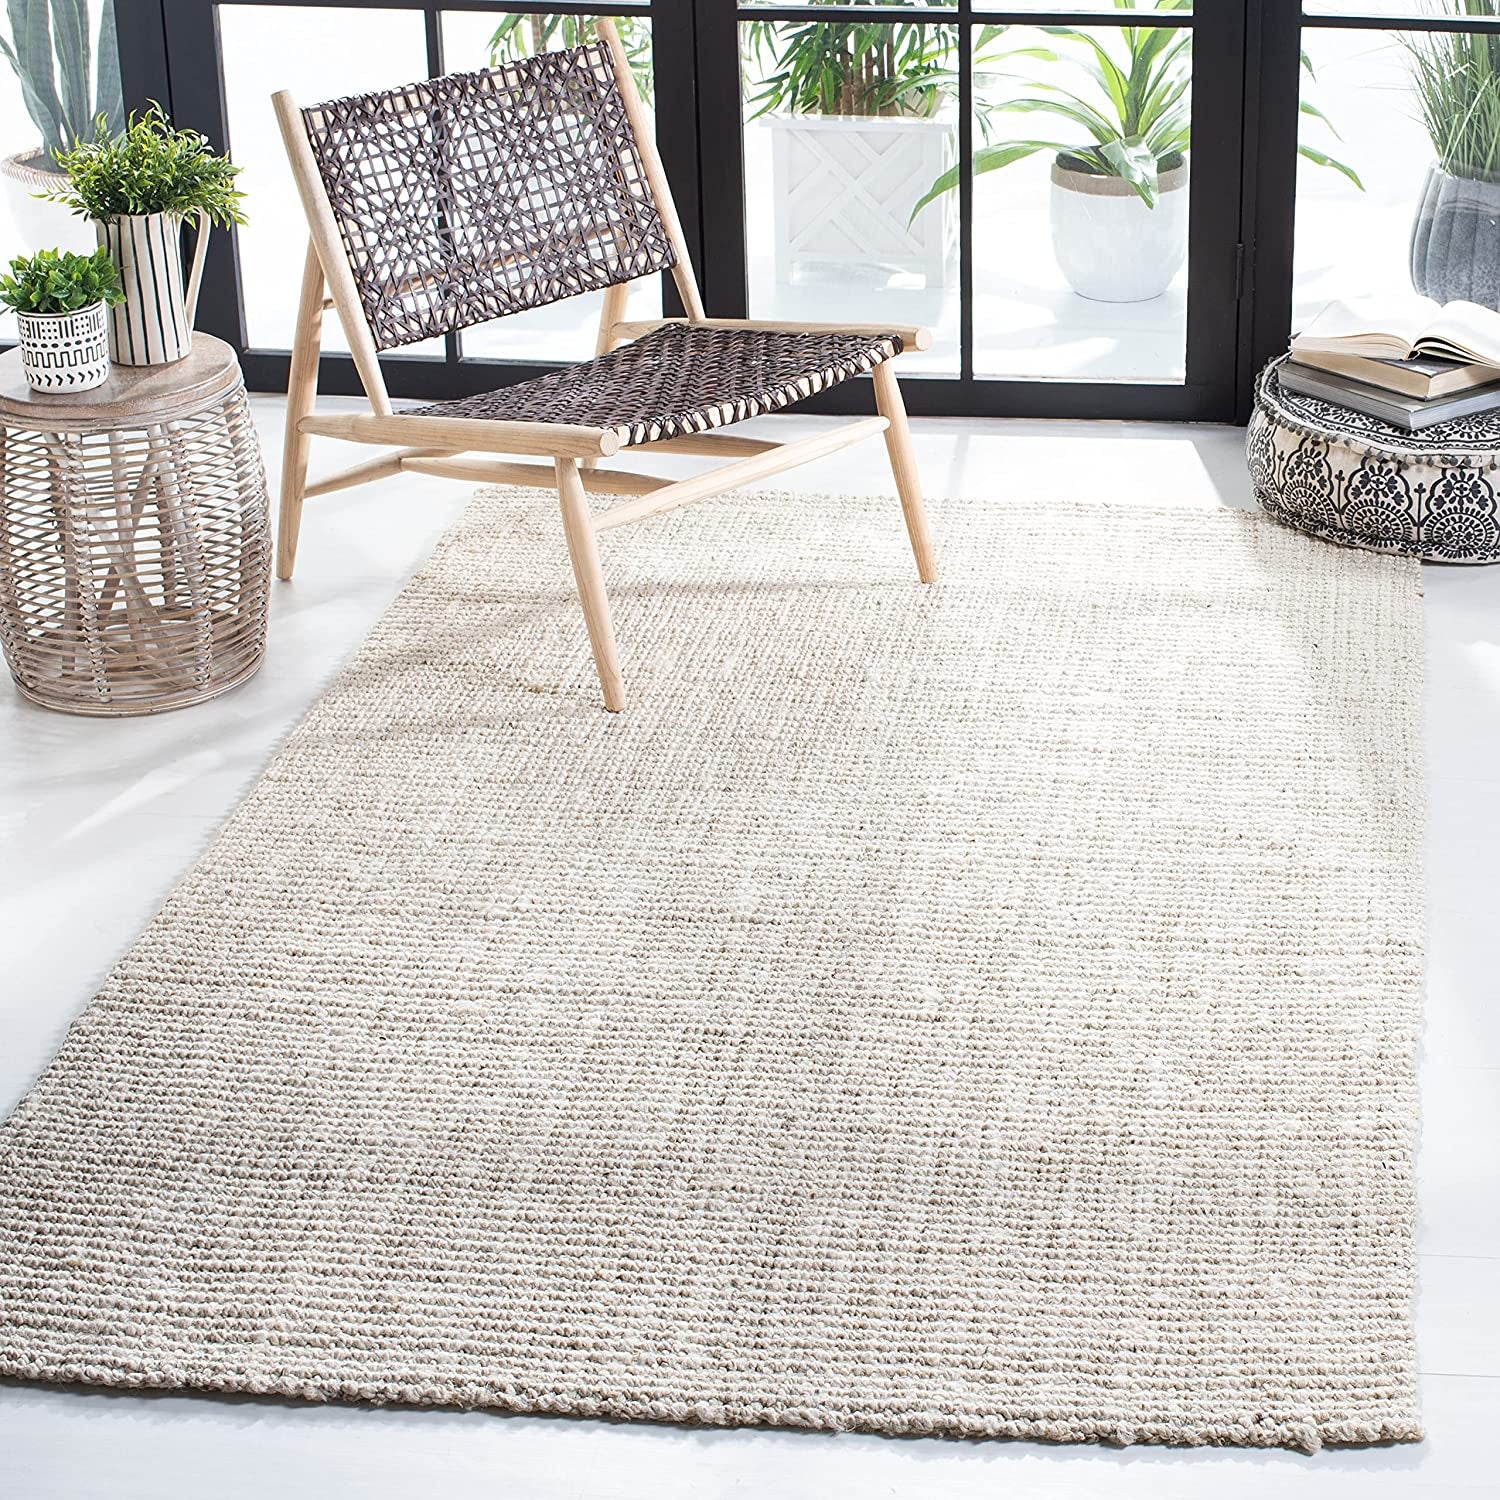 Natural Fiber Collection 9' X 12' Bleach/Ivory NF747B Handmade Contemporary Rustic Farmhouse Premium Jute Living Room Dining Bedroom Area Rug